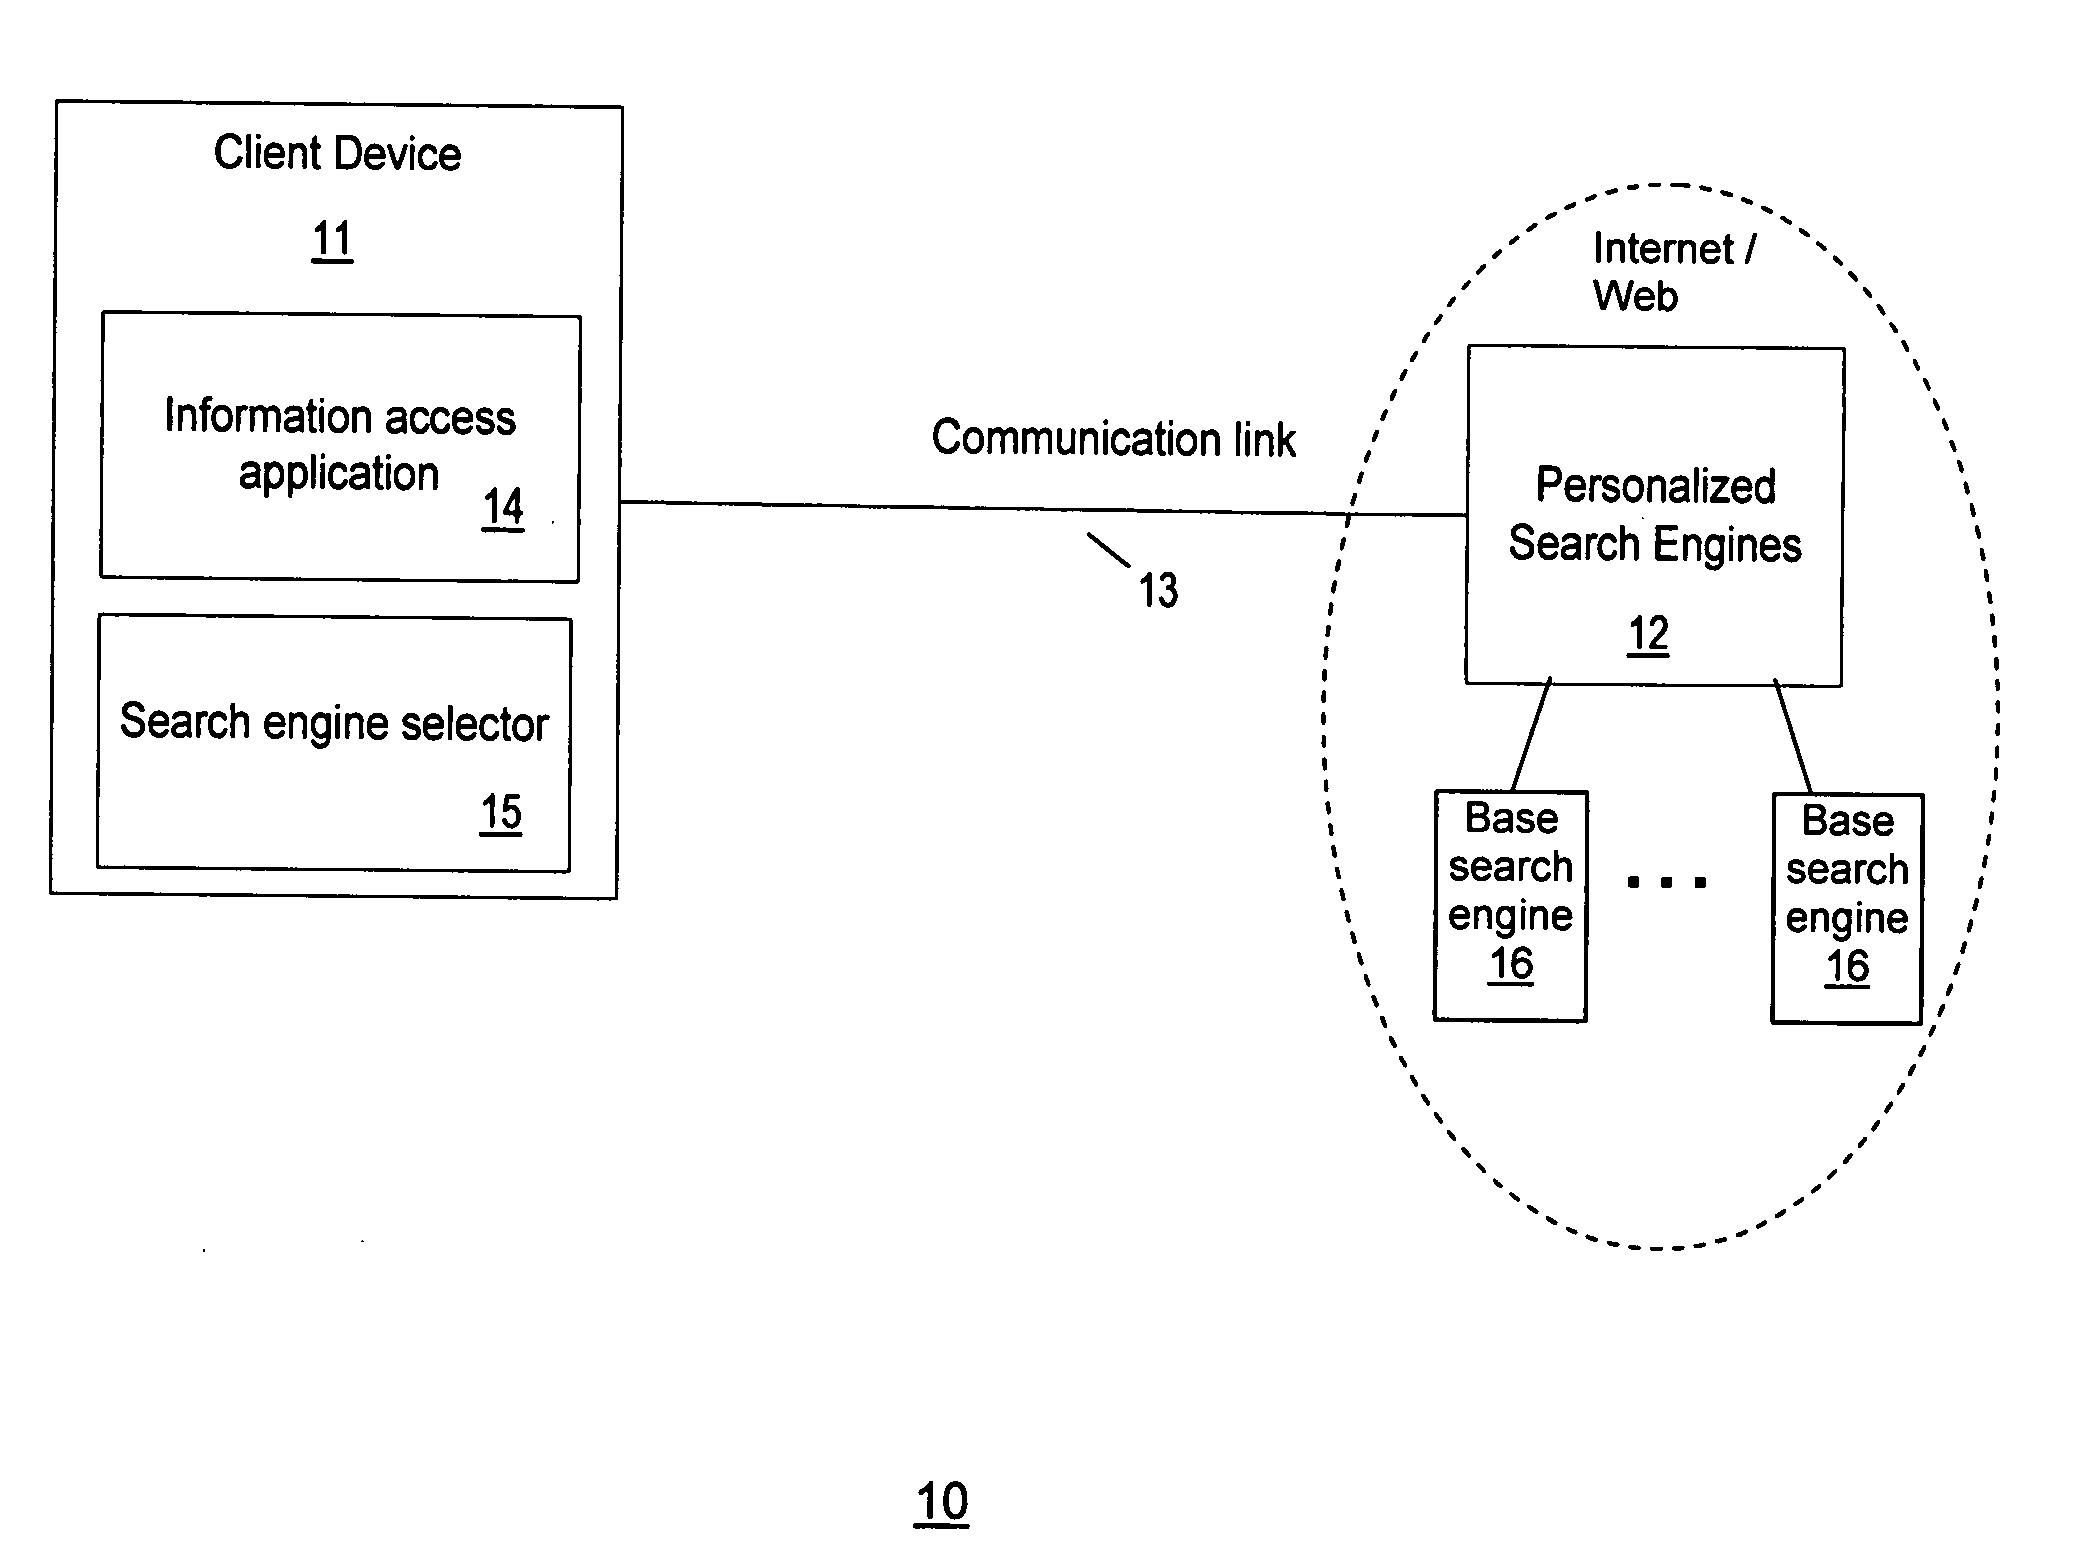 Method and system for selecting personalized search engines for accessing information